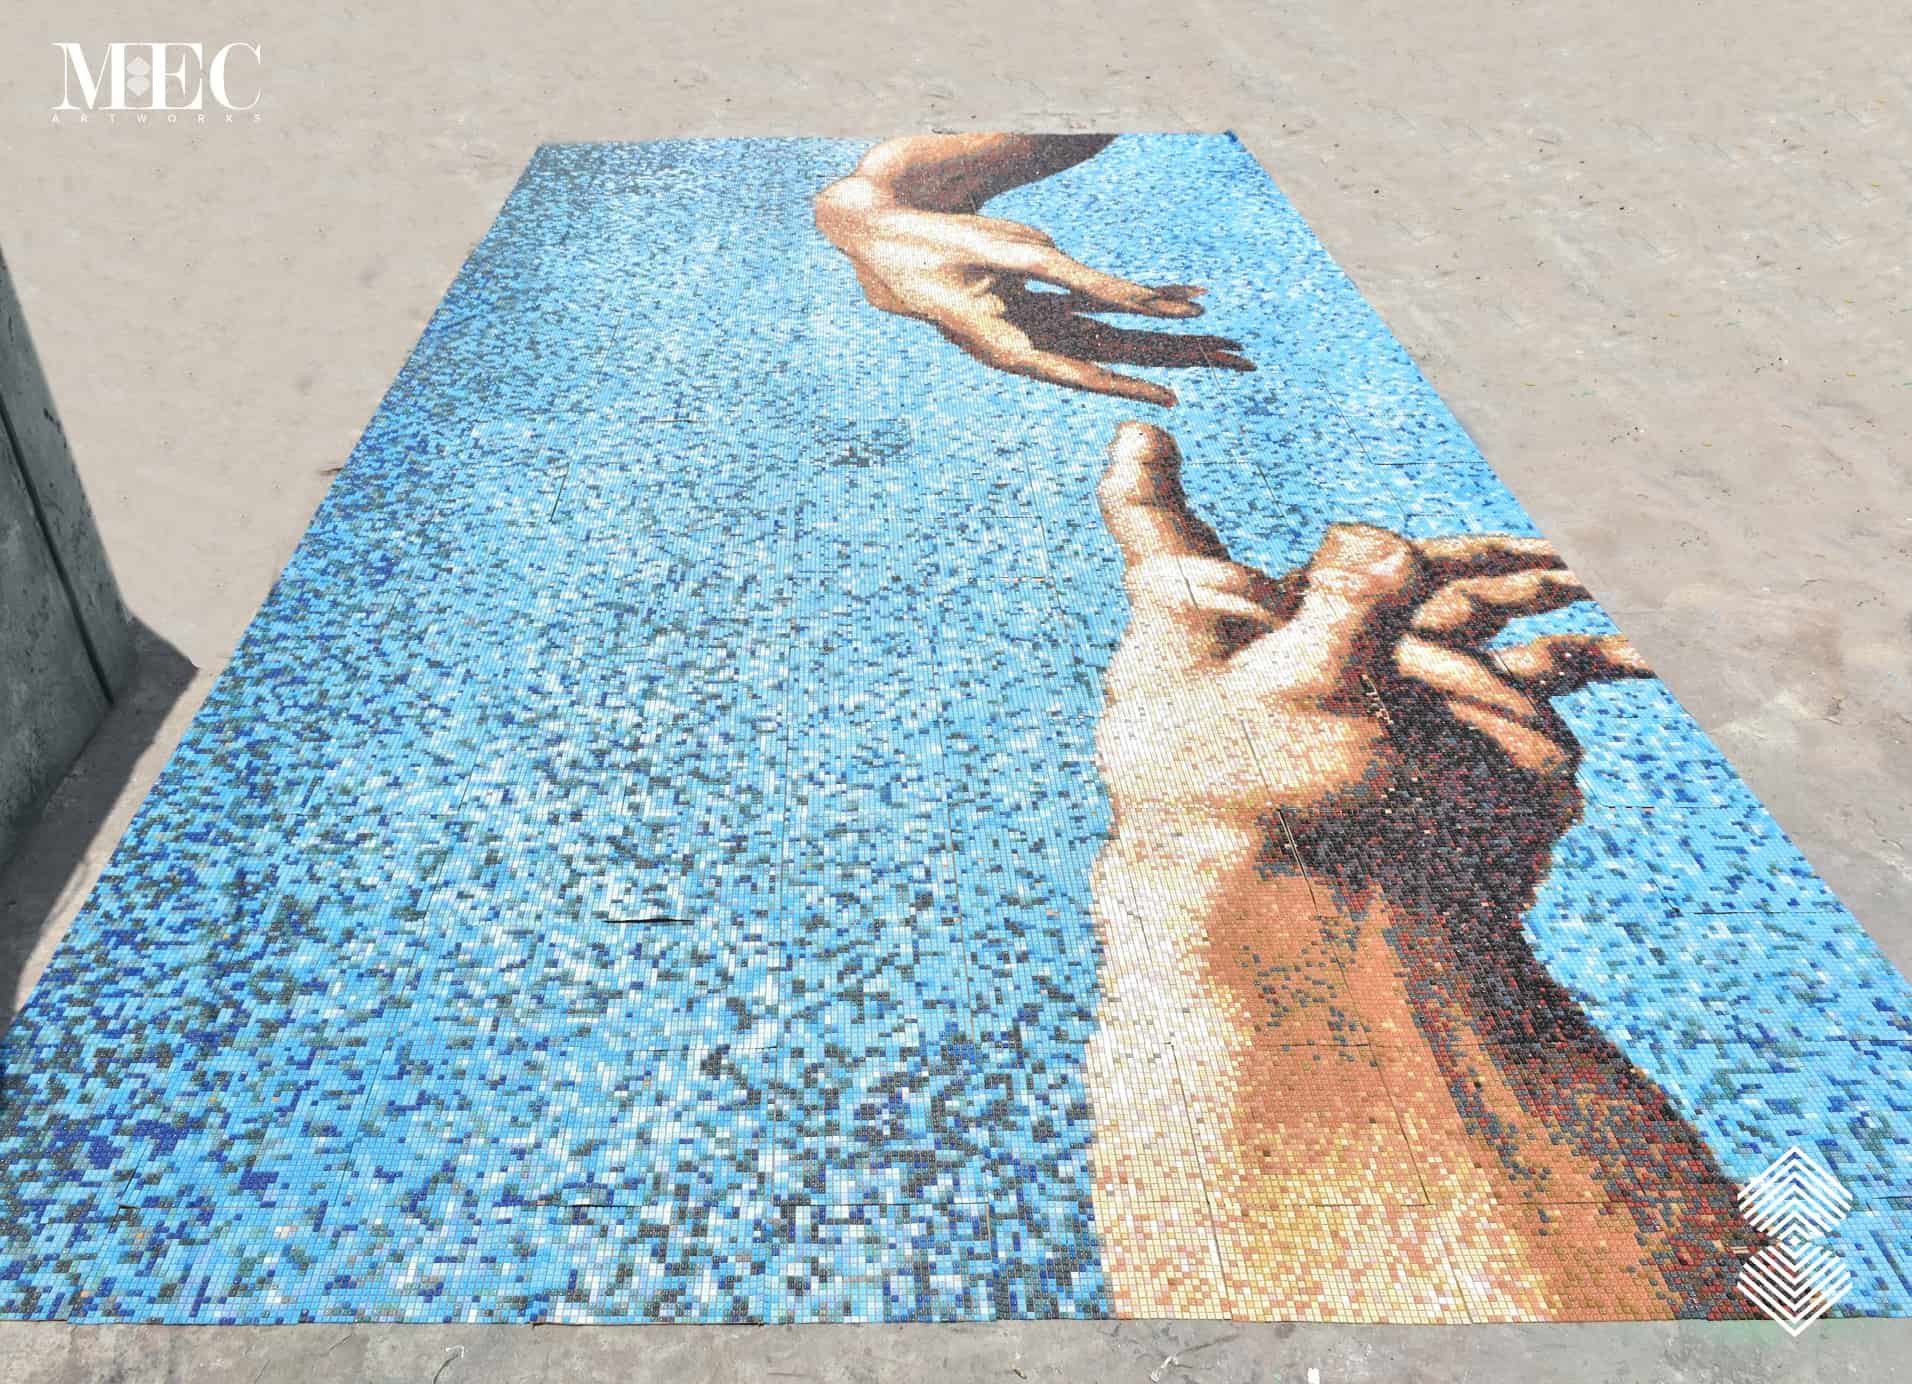 A Vertex glass mosaic rendition of Michelangelo's masterpiece at our workshop (moments before being packed and dispatched). The famous fresco painting from Sistine Chapel's ceiling inspired this swimming pool tile art.